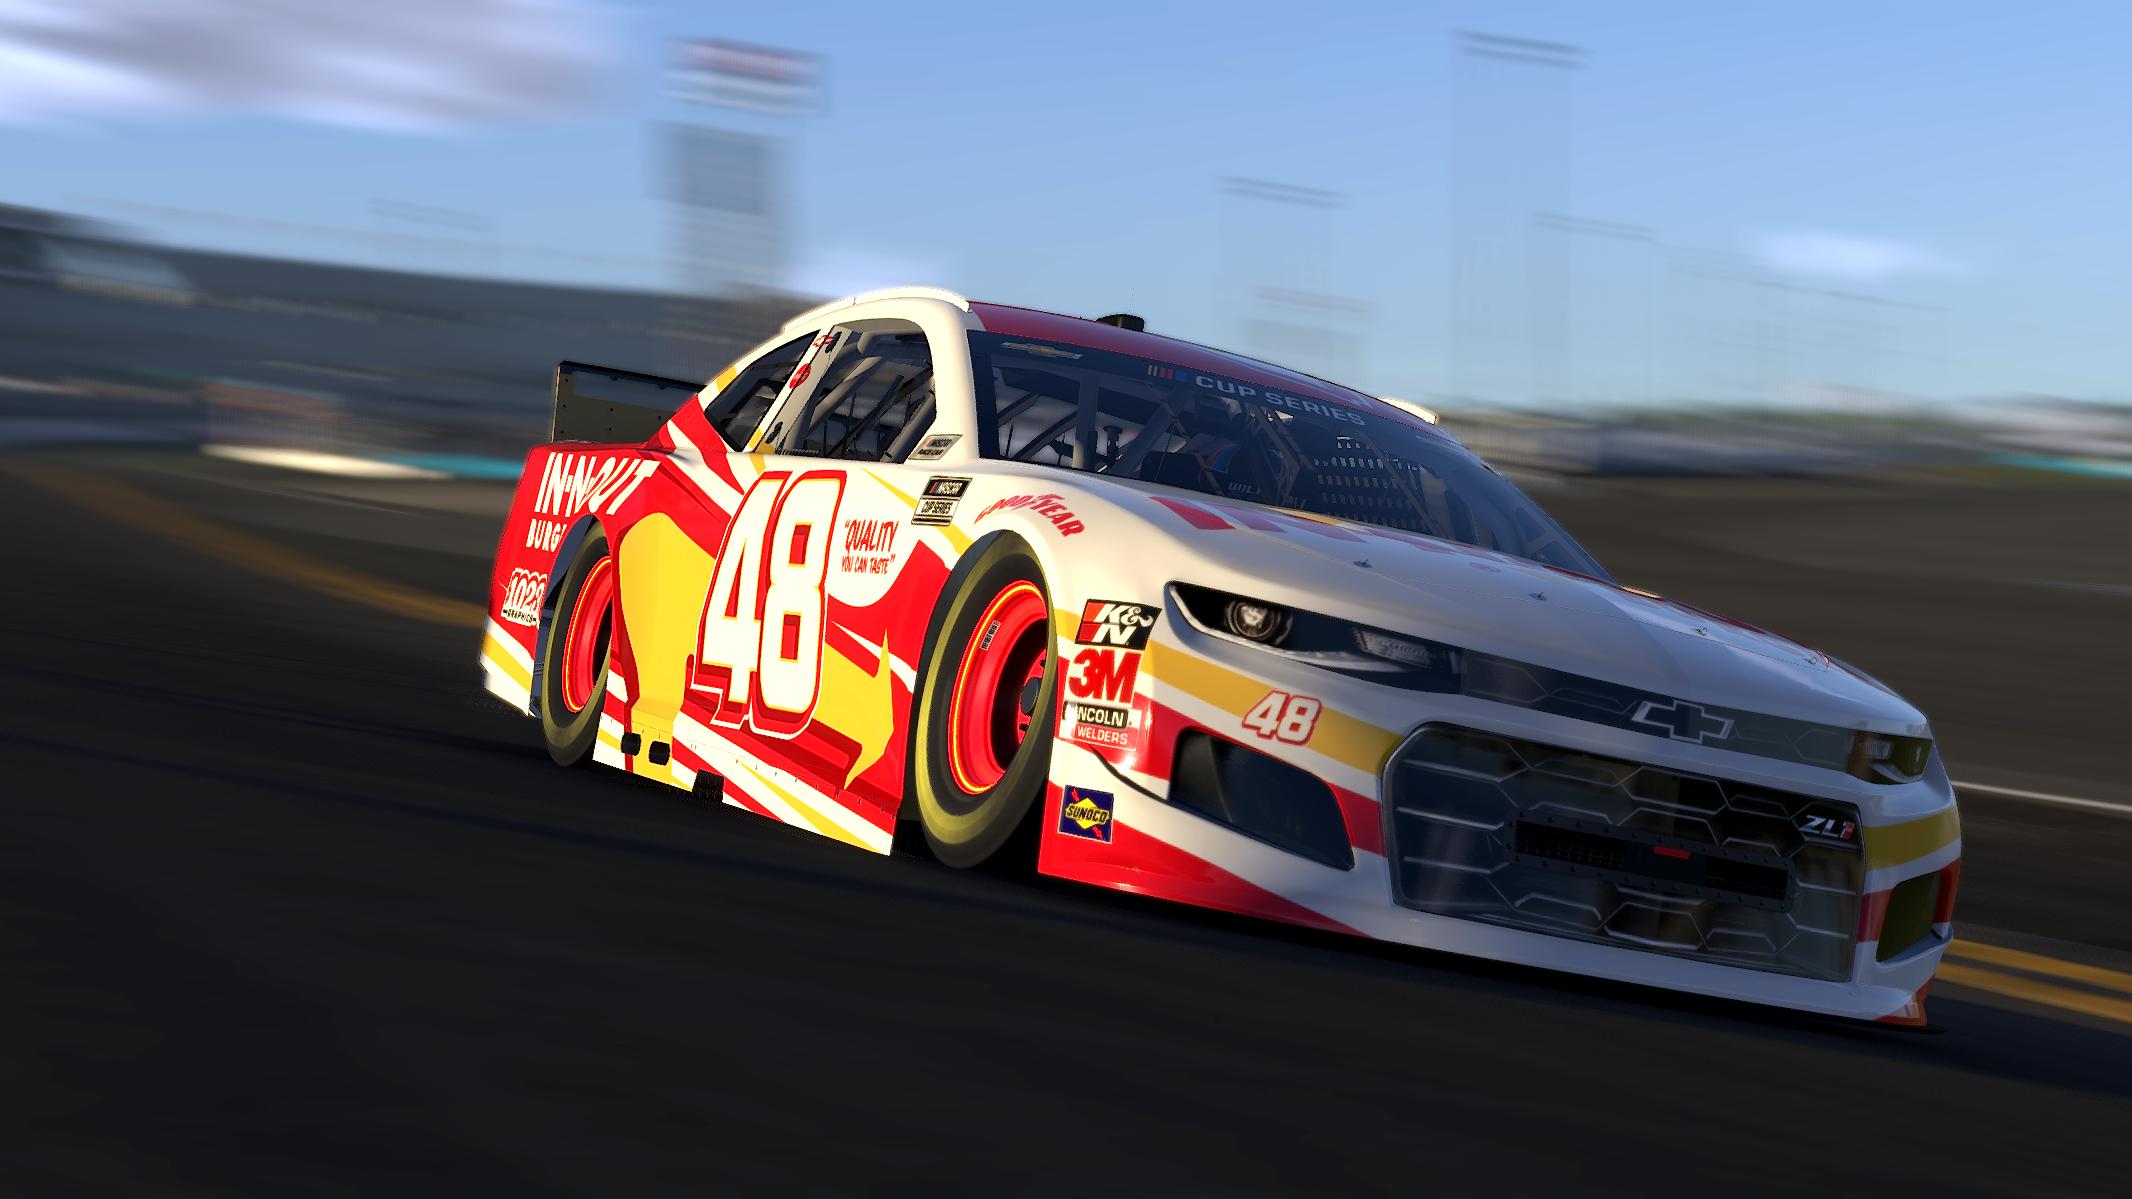 Preview of In-N-Out Cup Carmaro ZL1 by Justin T Wilkinson